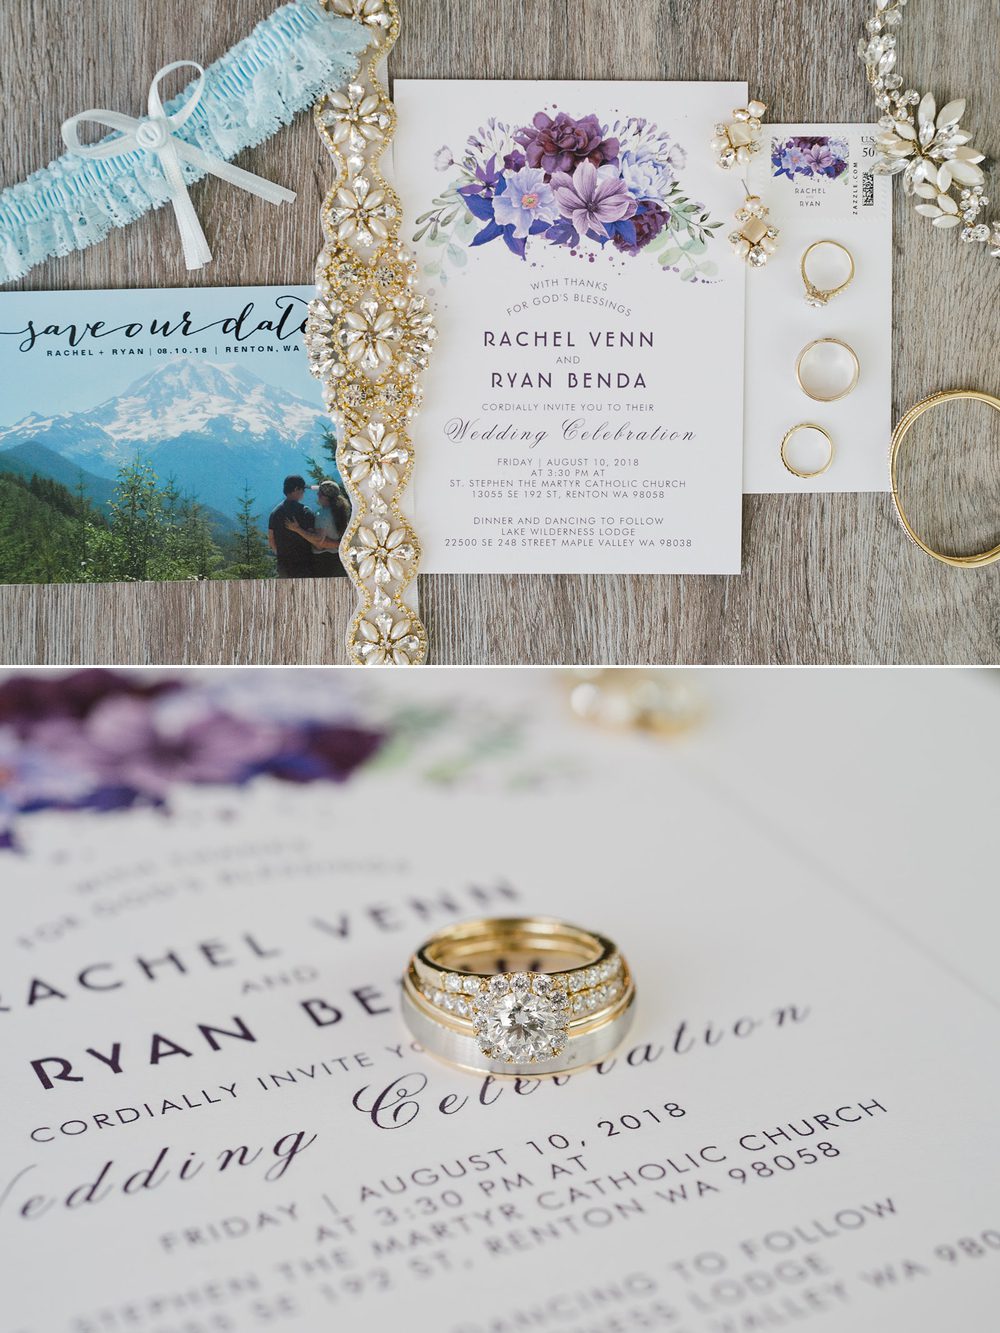 purple-and-white-wedding-invitation-with-wedding-rings